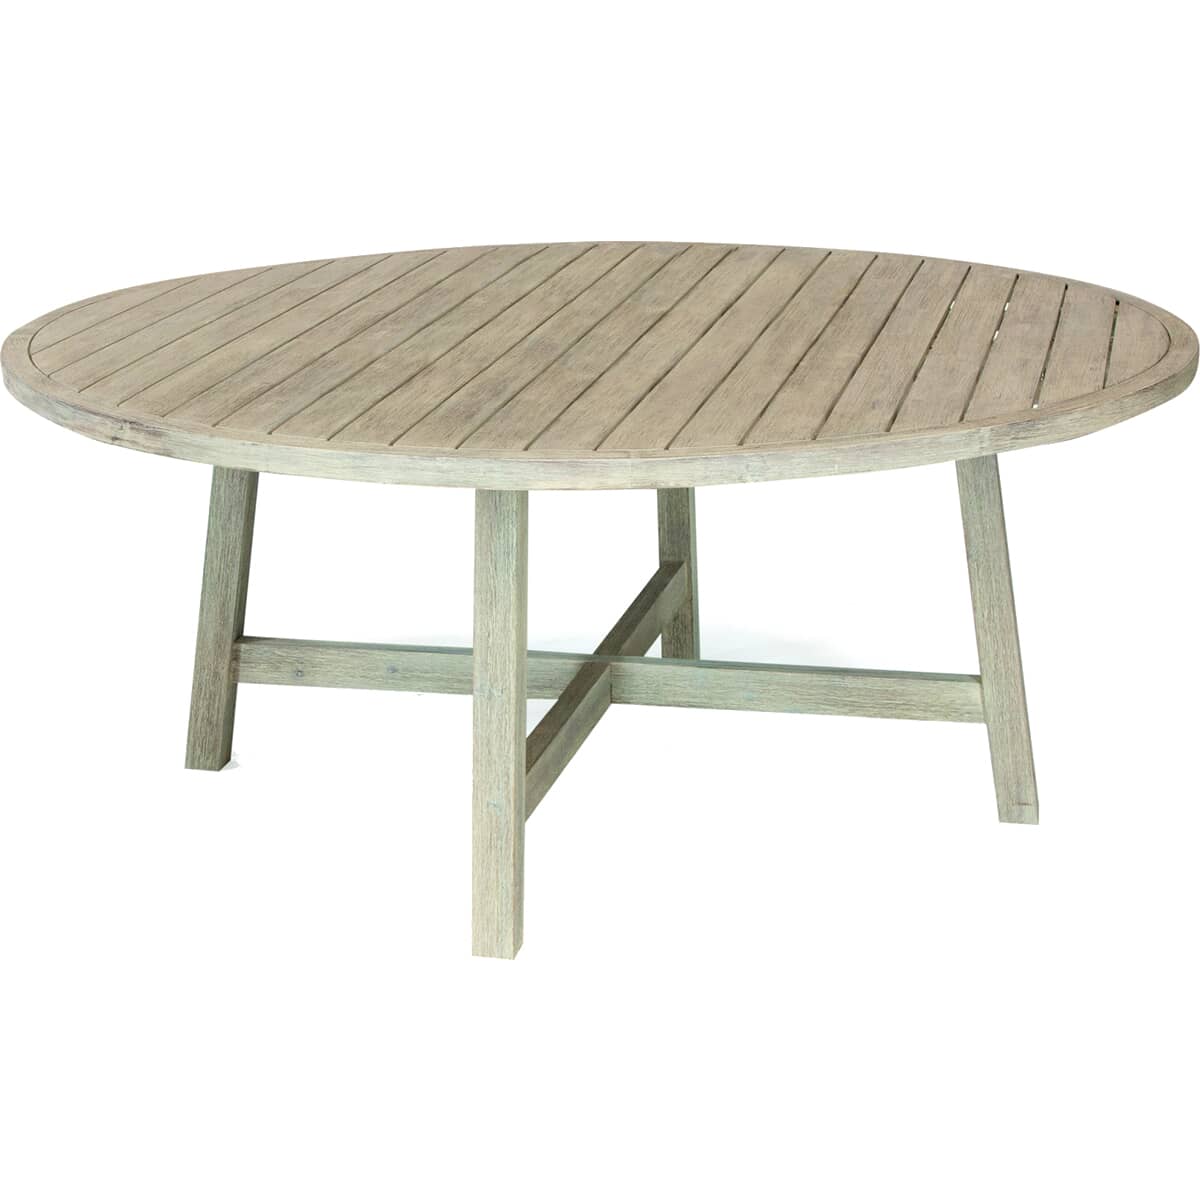 Kettler Cora - 180cm Round Dining Table